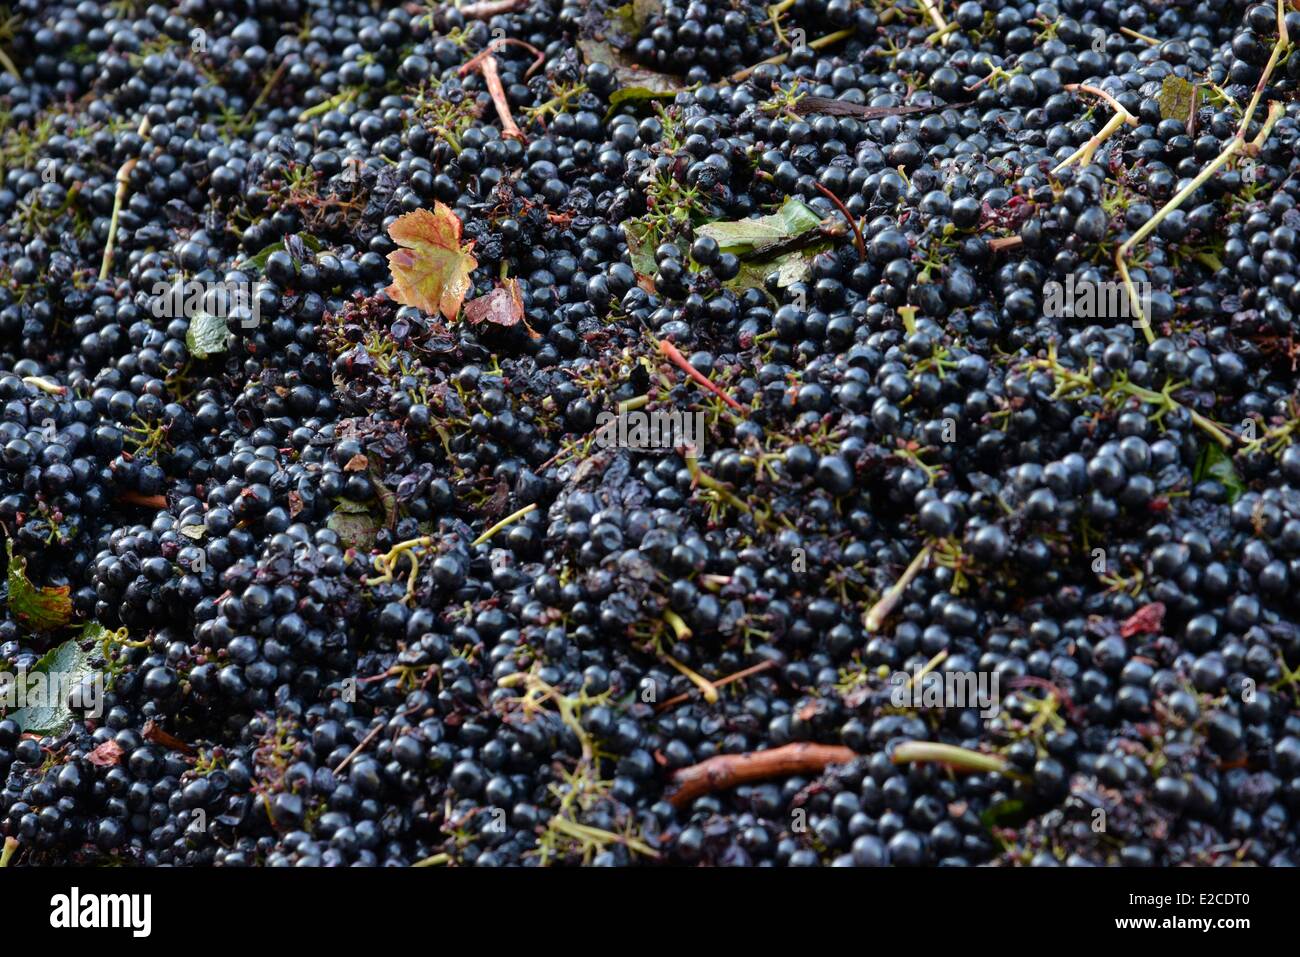 France, Herault, Boujan sur Libron, vineyards of the Domain Haute Condamine, the bulk bunches of grapes before the pressing Stock Photo